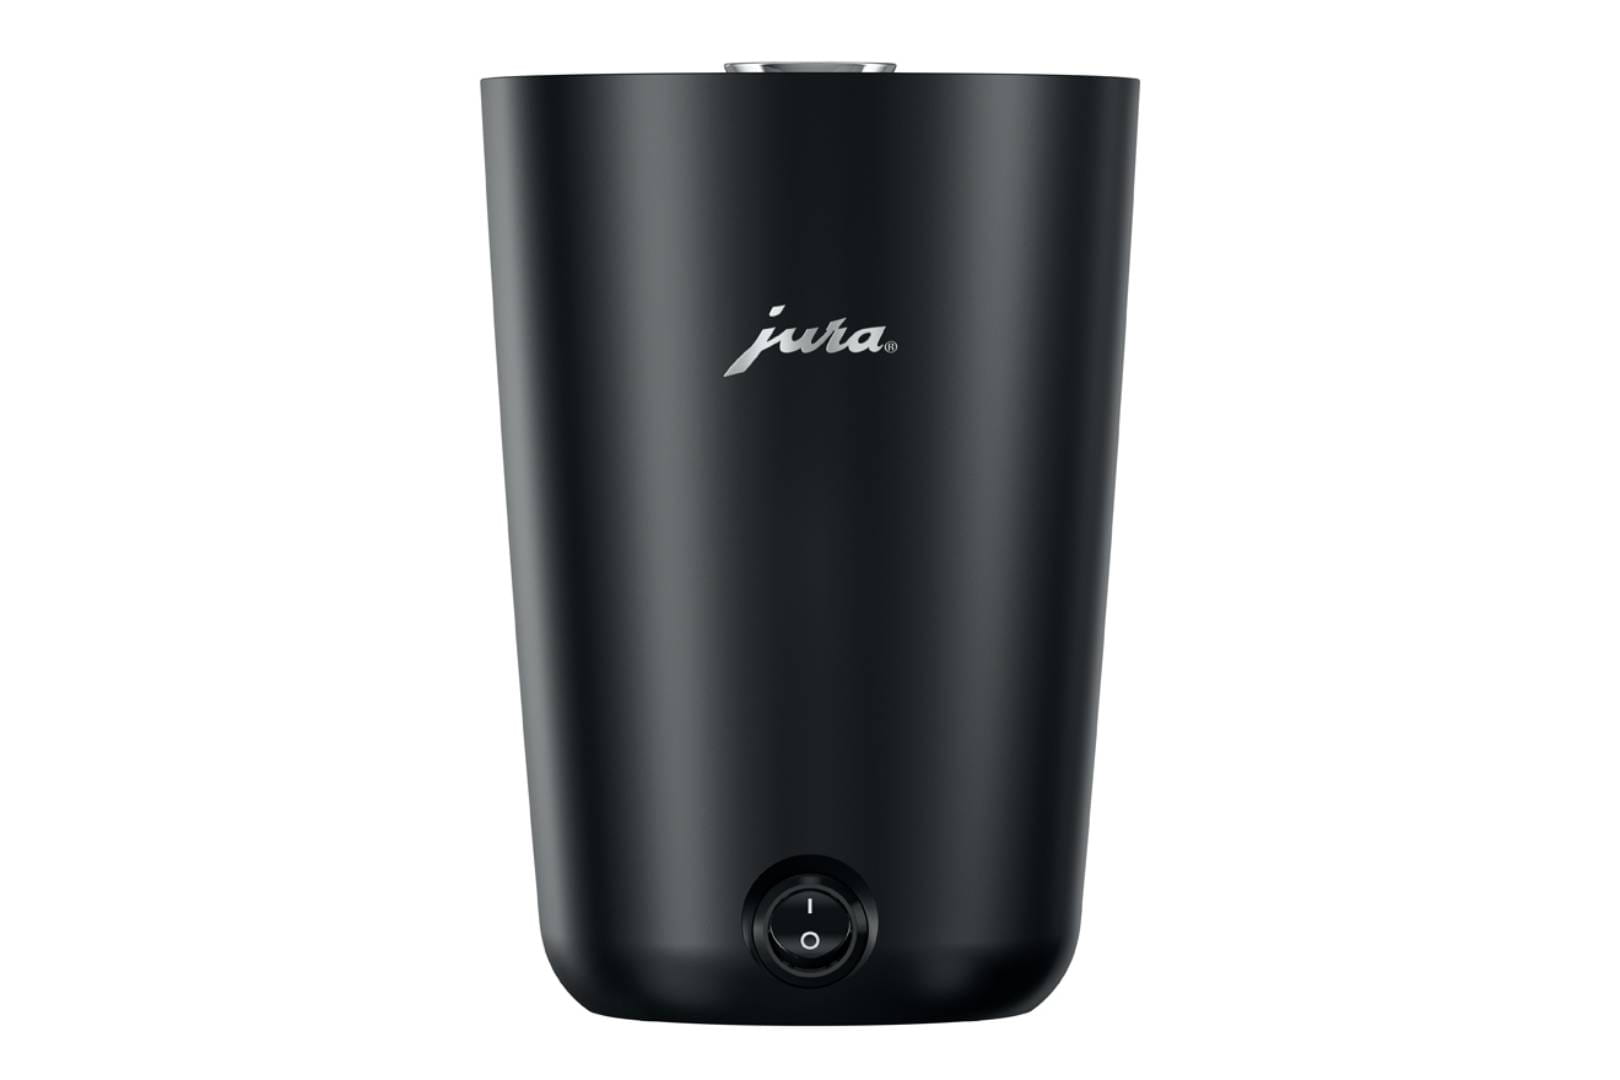 https://www.jura.com/-/media/global/images/home-products/accessories/CupWarmer-S/black/image-gallery/cupwarmer_s_image2.jpg